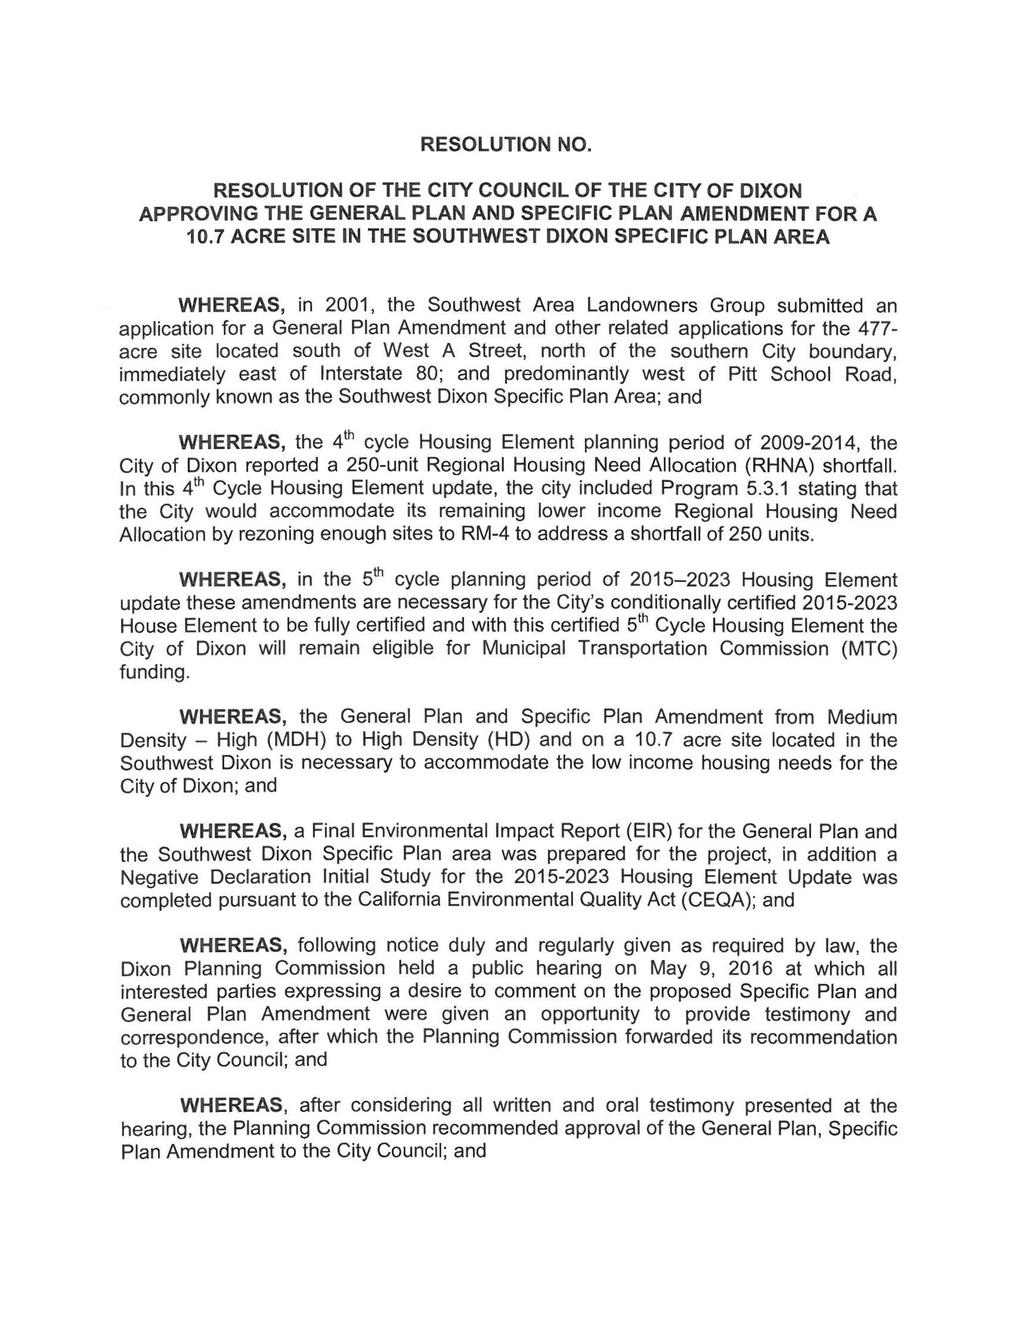 RESOLUTION NO. RESOLUTION OF THE CITY COUNCIL OF THE CITY OF DIXON APPROVING THE GENERAL PLAN AND SPECIFIC PLAN AMENDMENT FOR A 10.